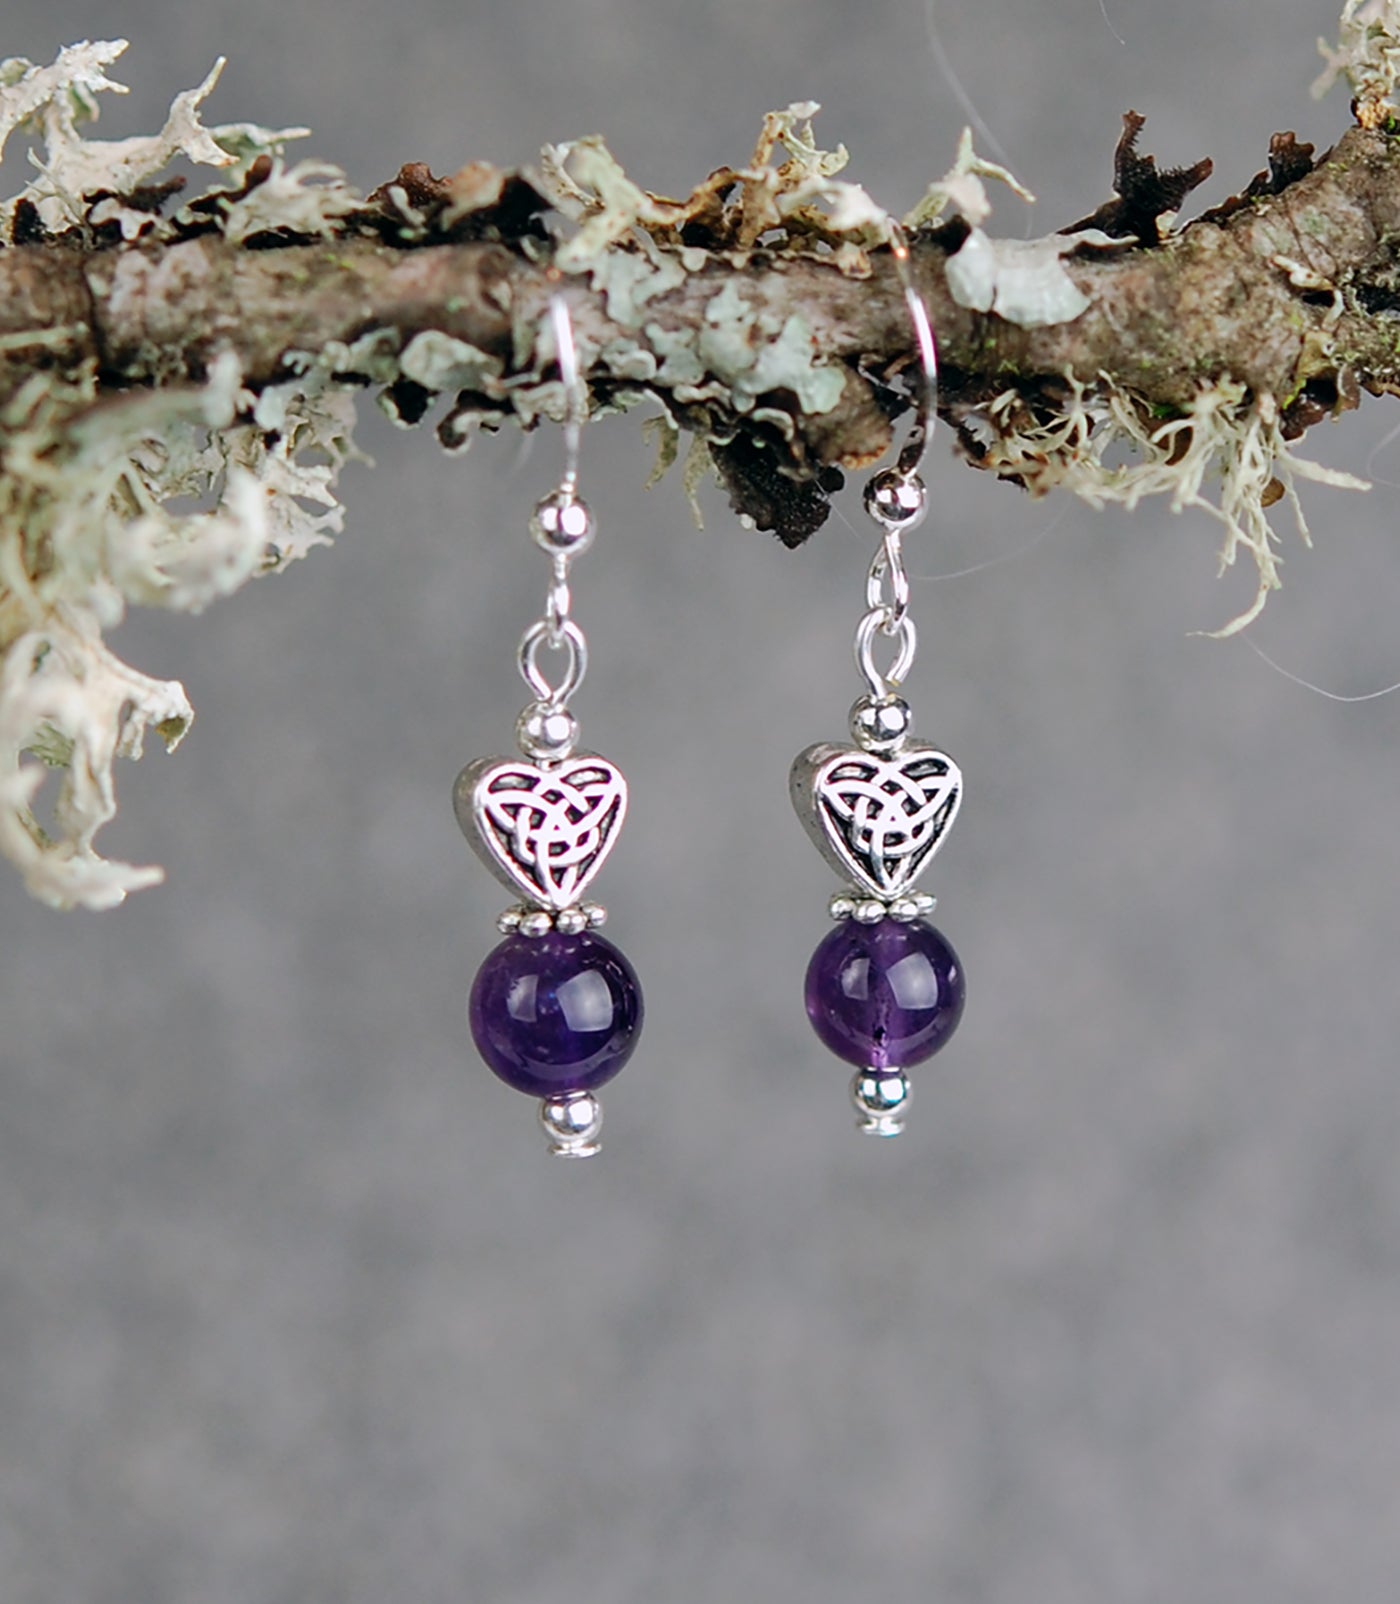 Amethyst Gemstones with Small Celtic Heart